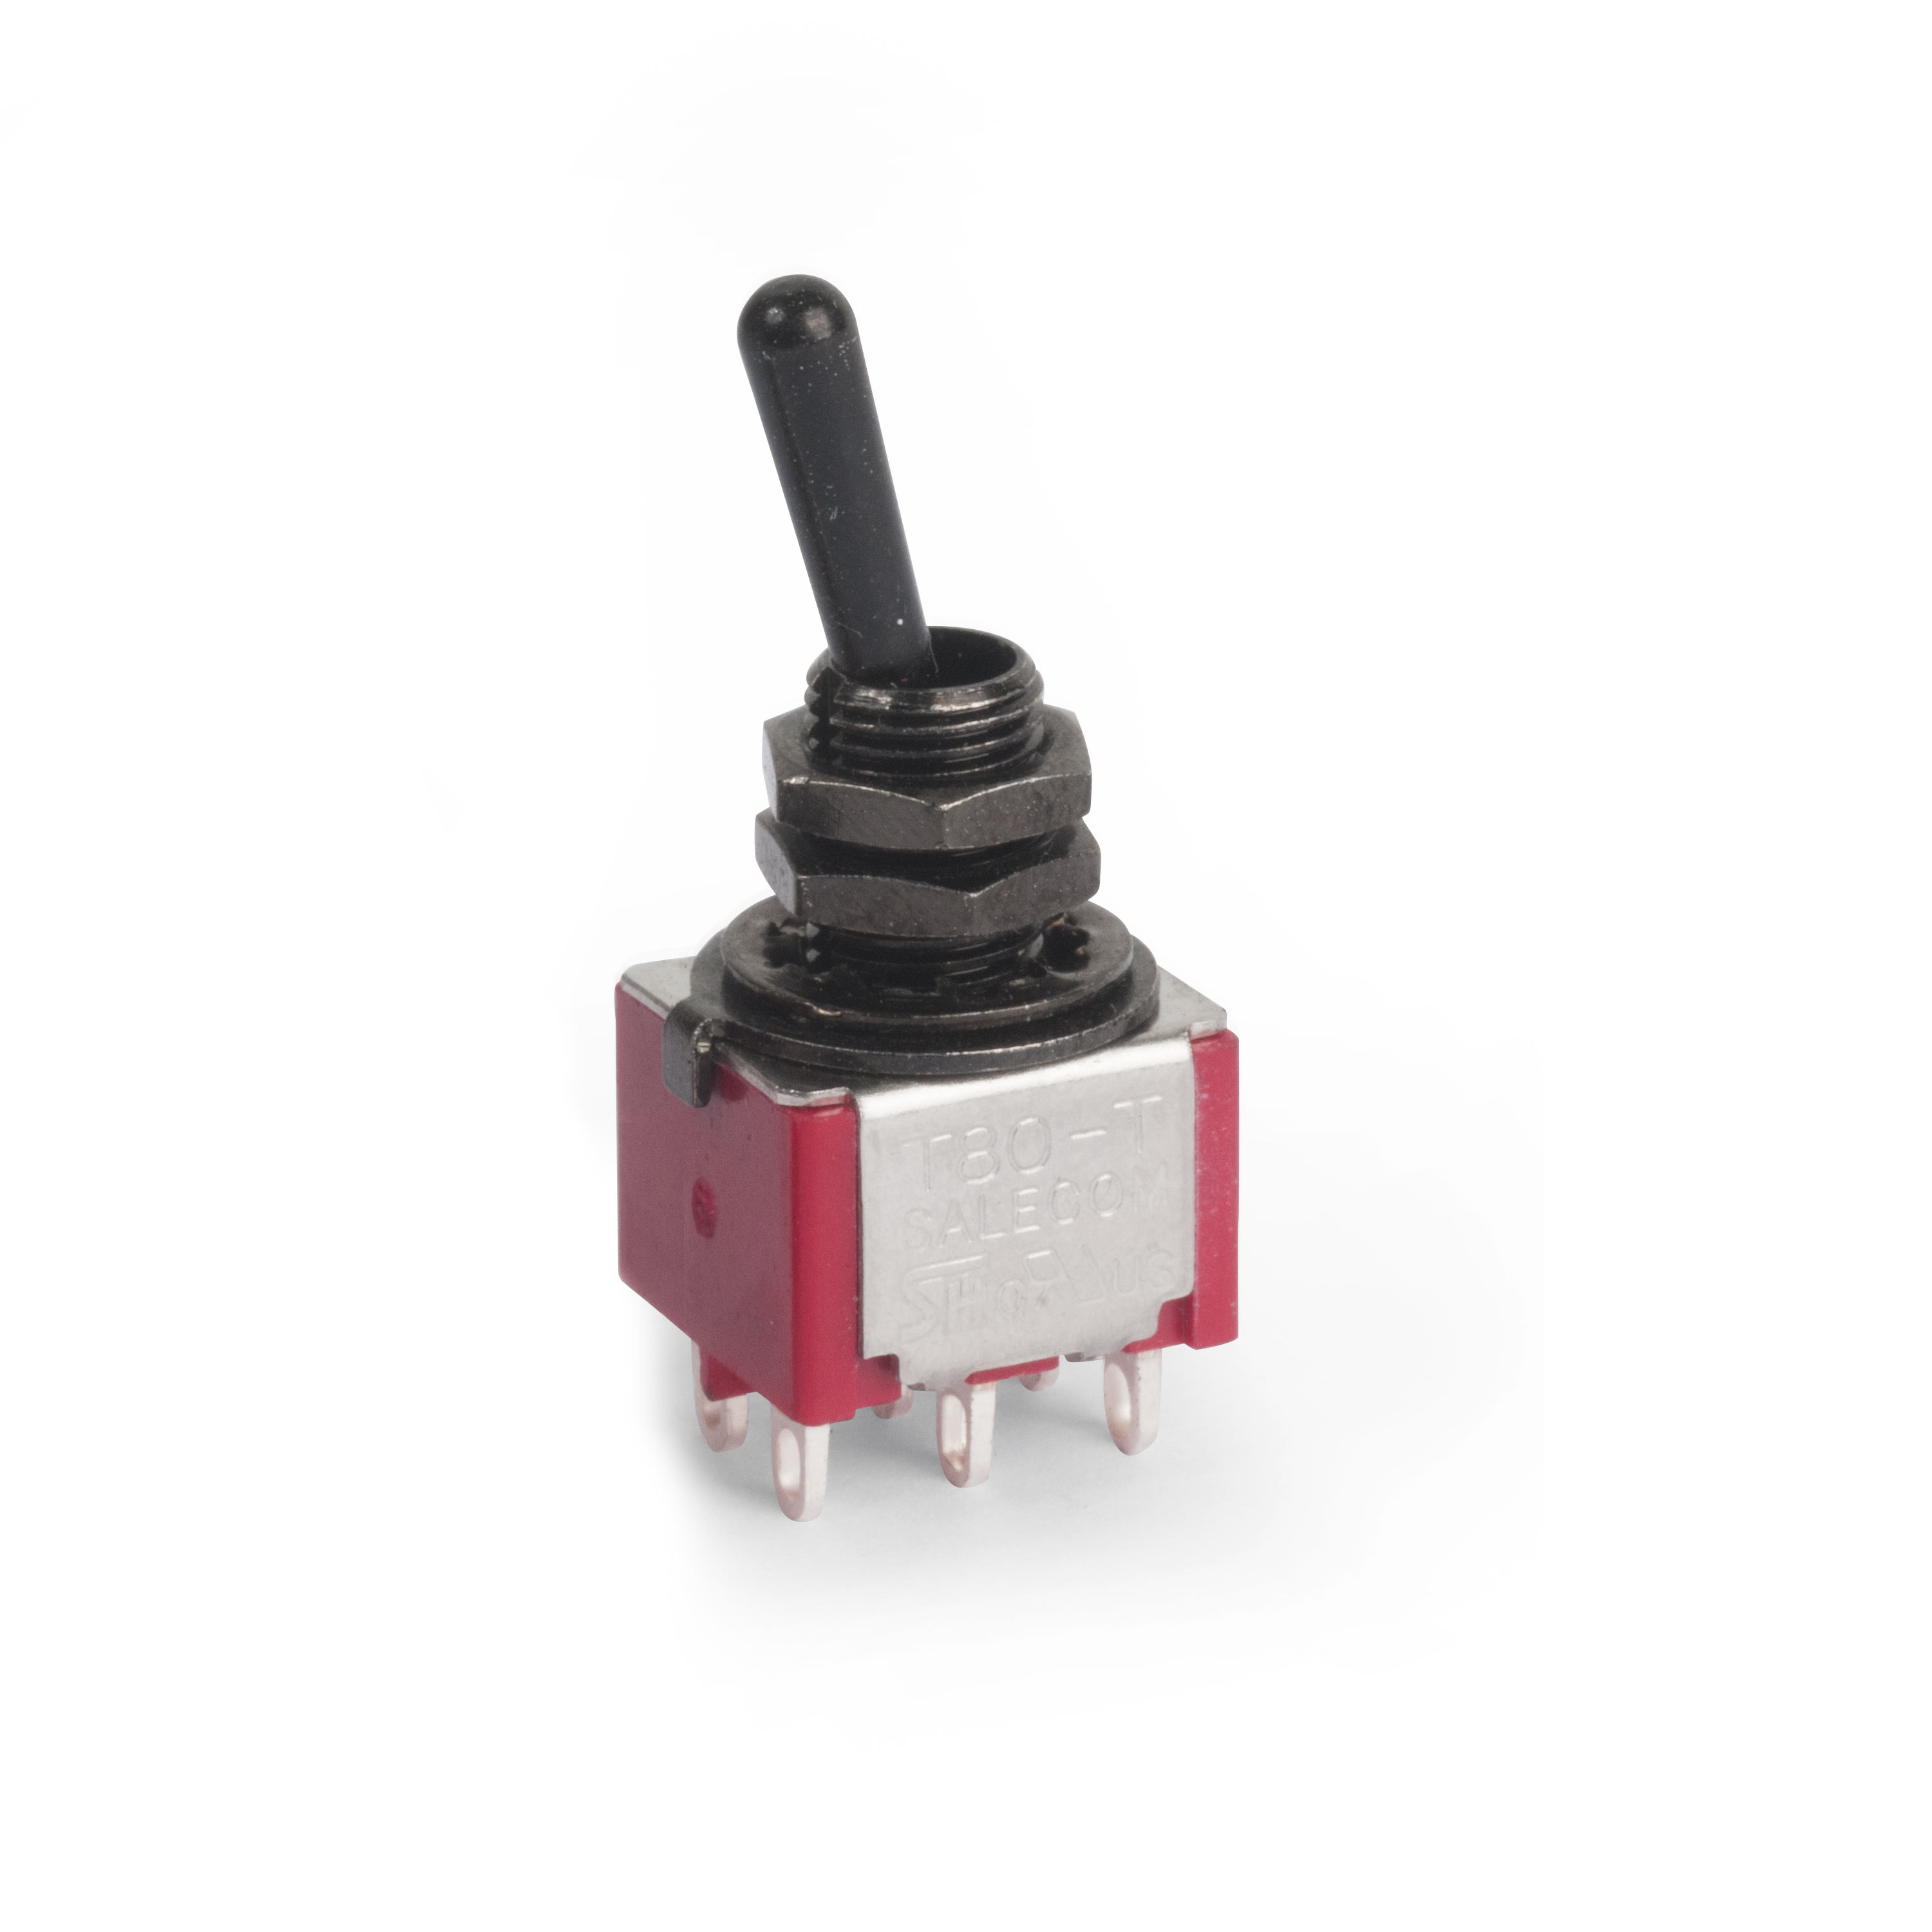 Mini Toggle Switch DPDT ON-ON Two Posizione Rosso 2A 250V 5A 120V V5A6 N1R7 